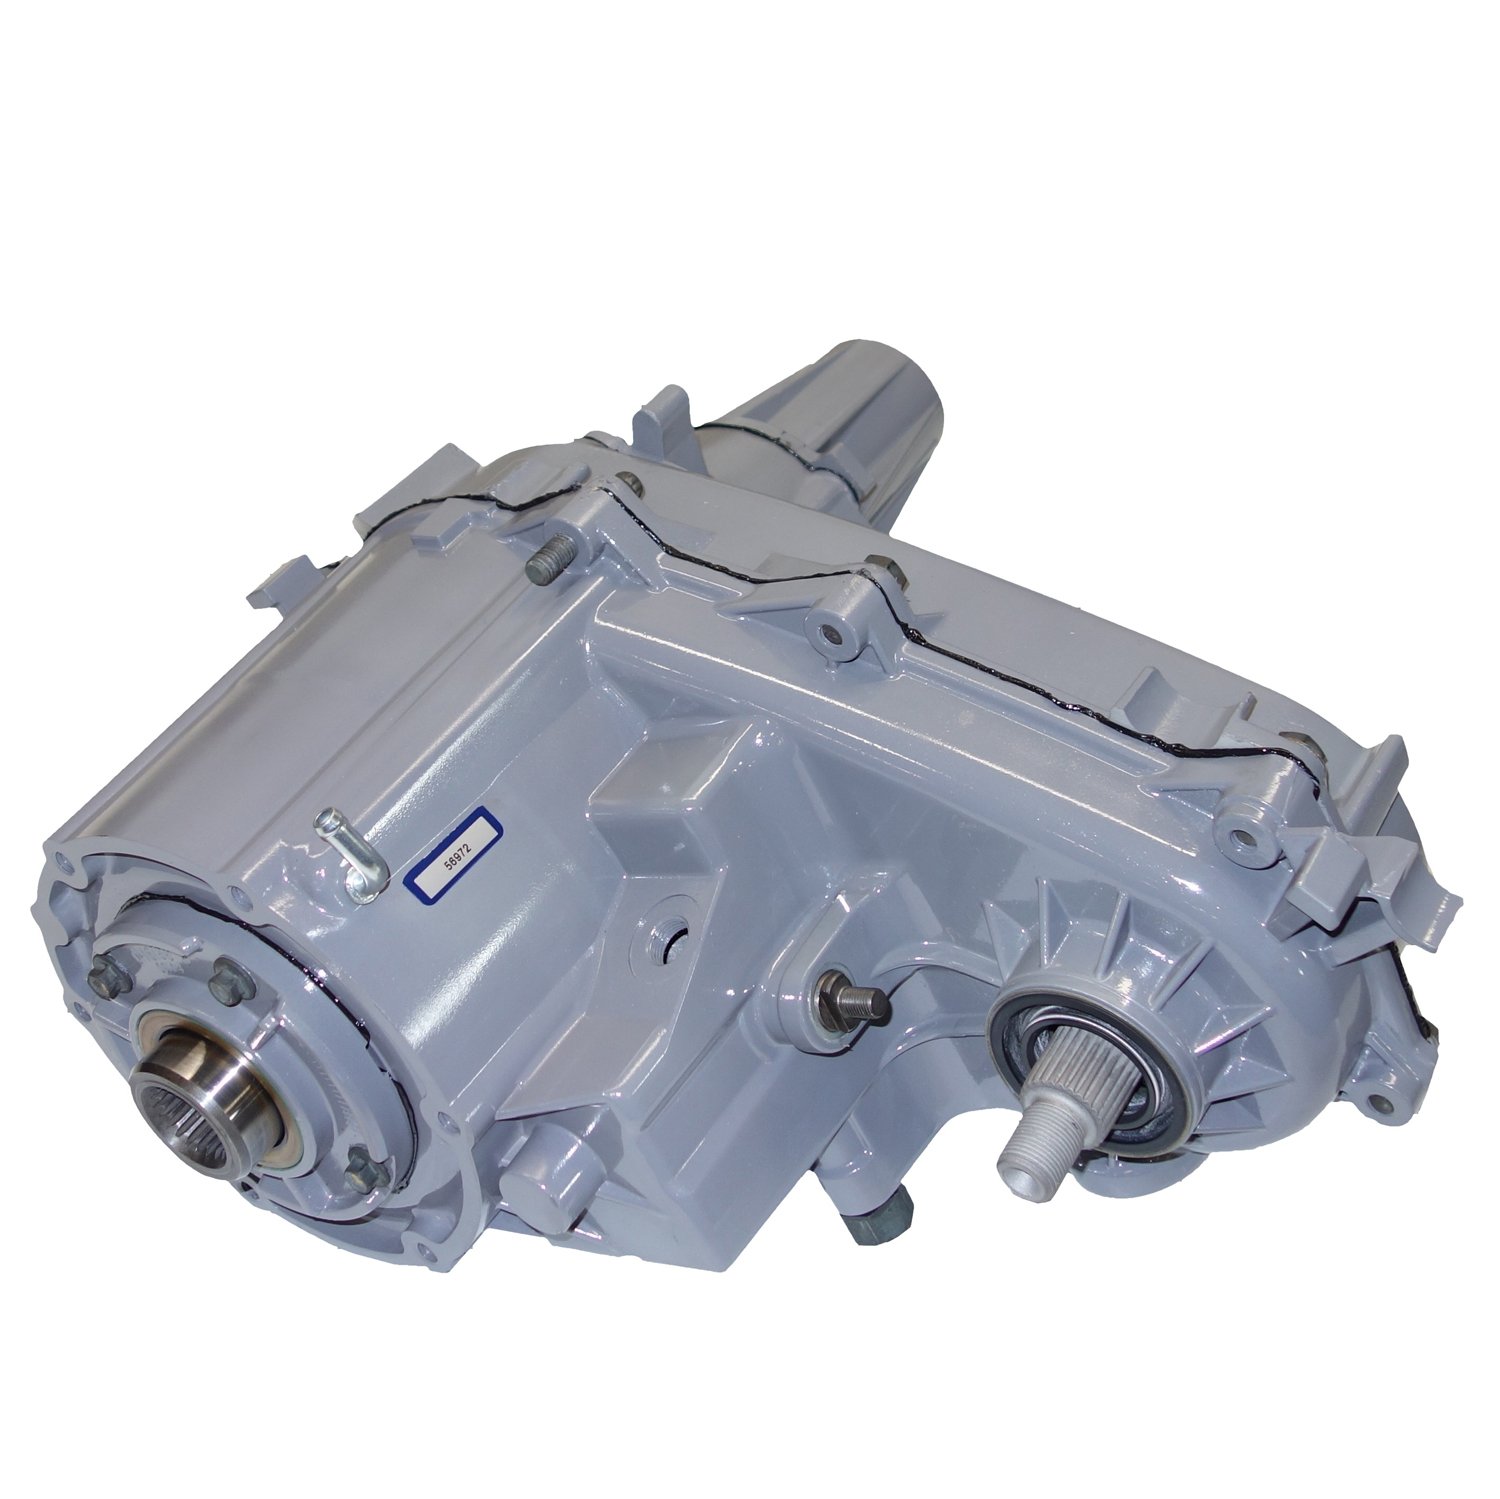 Remanufactured NP231 Transfer Case for Jeep 89-95 Wrangler